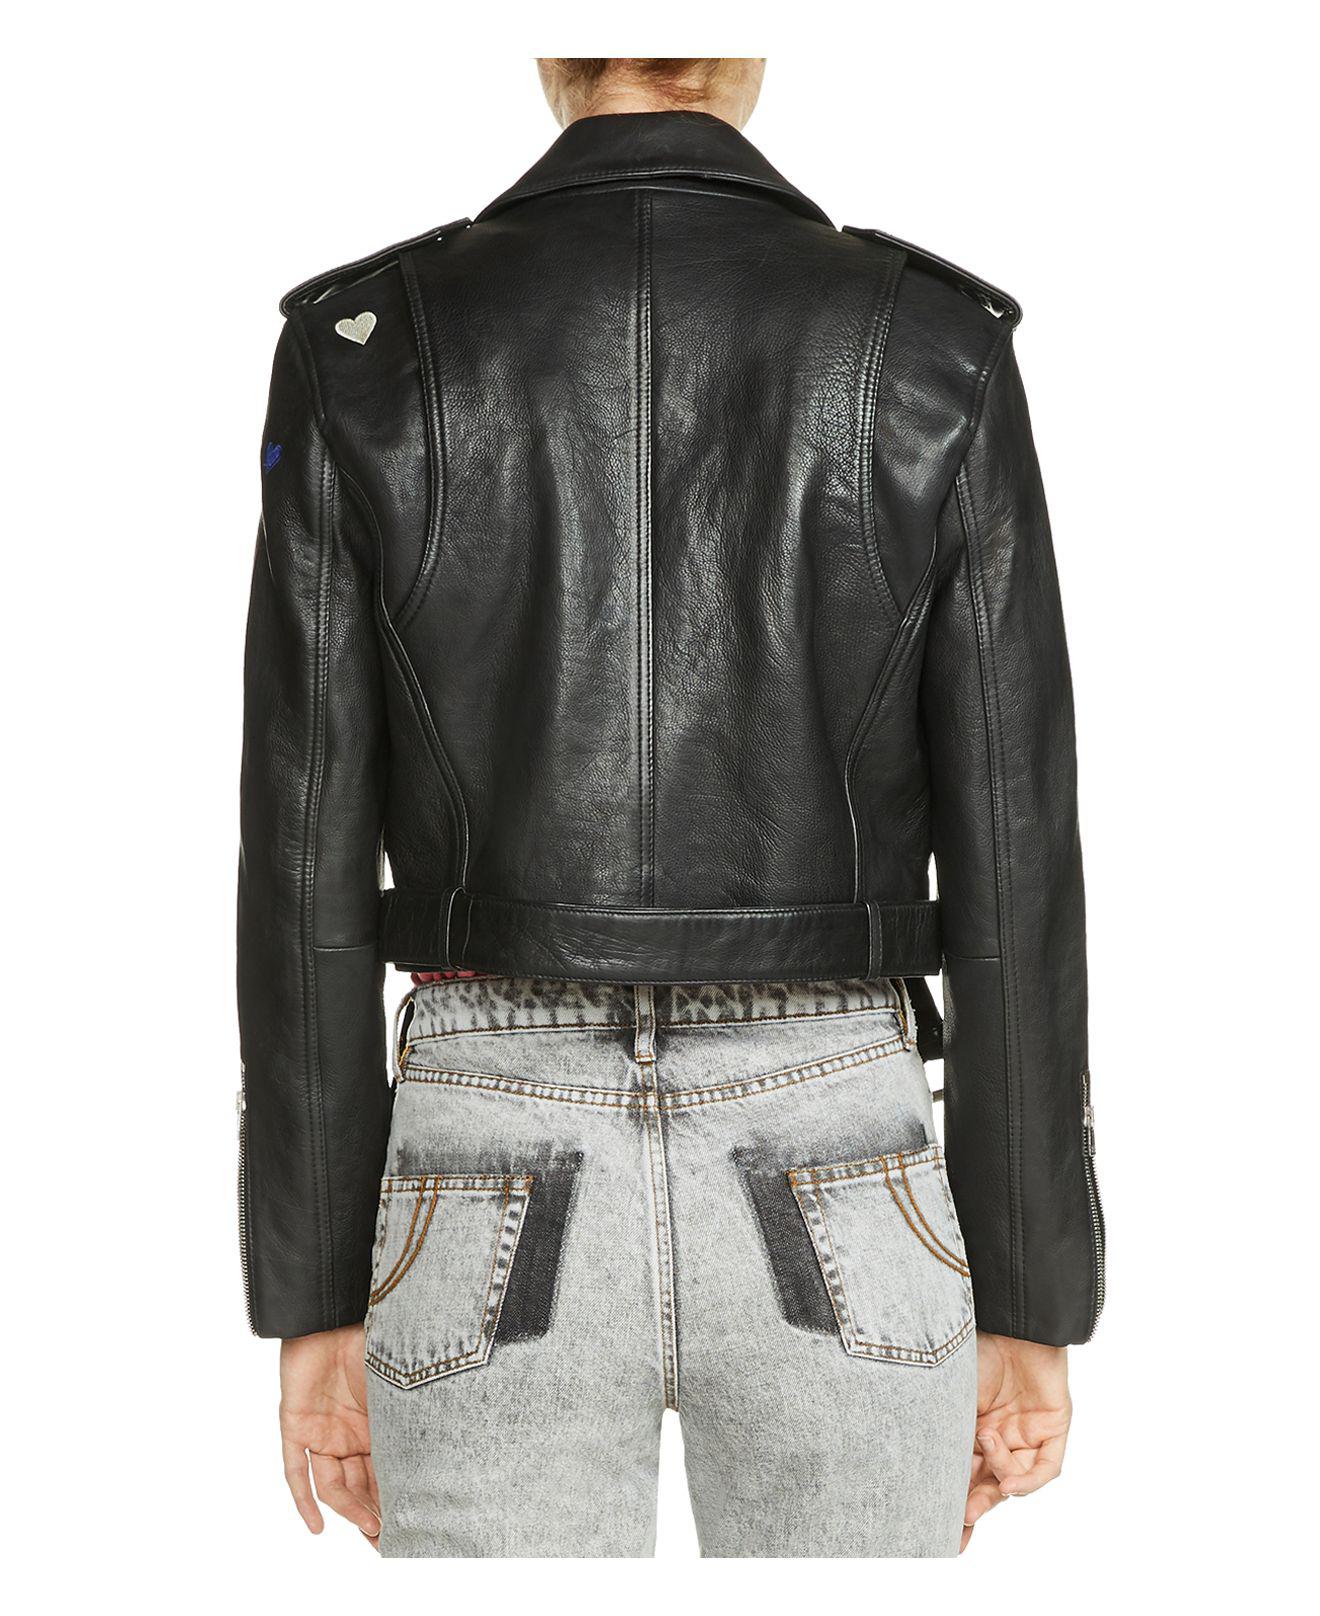 Maje Bicoeur Embroidered Leather Jacket in Black | Lyst